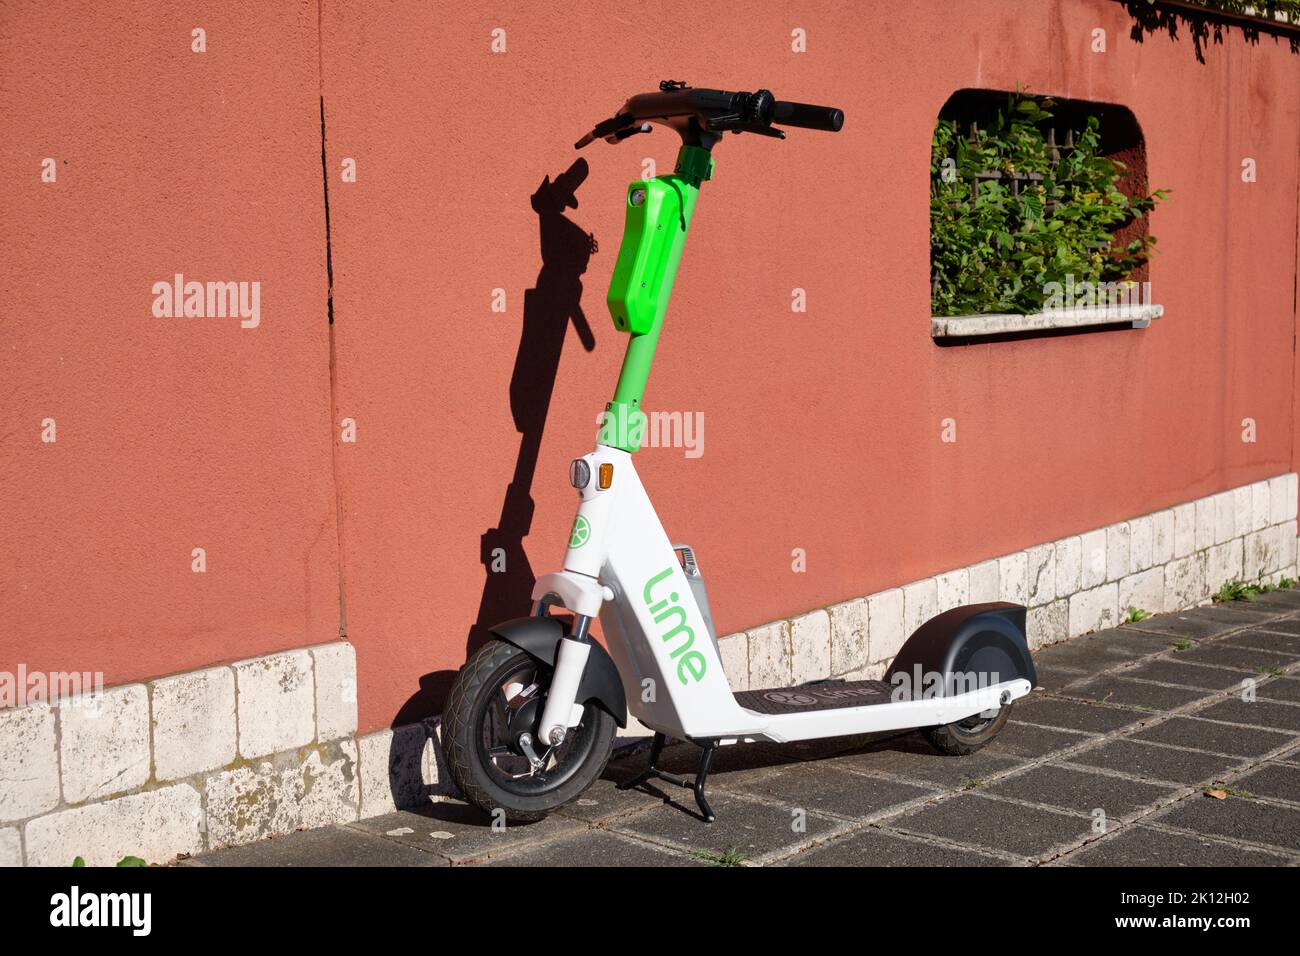 Nuremberg, Germany - August 23, 2022: An electric scooter of the company Lime is standing on the pavement in front of a red wall in the sunlight Stock Photo